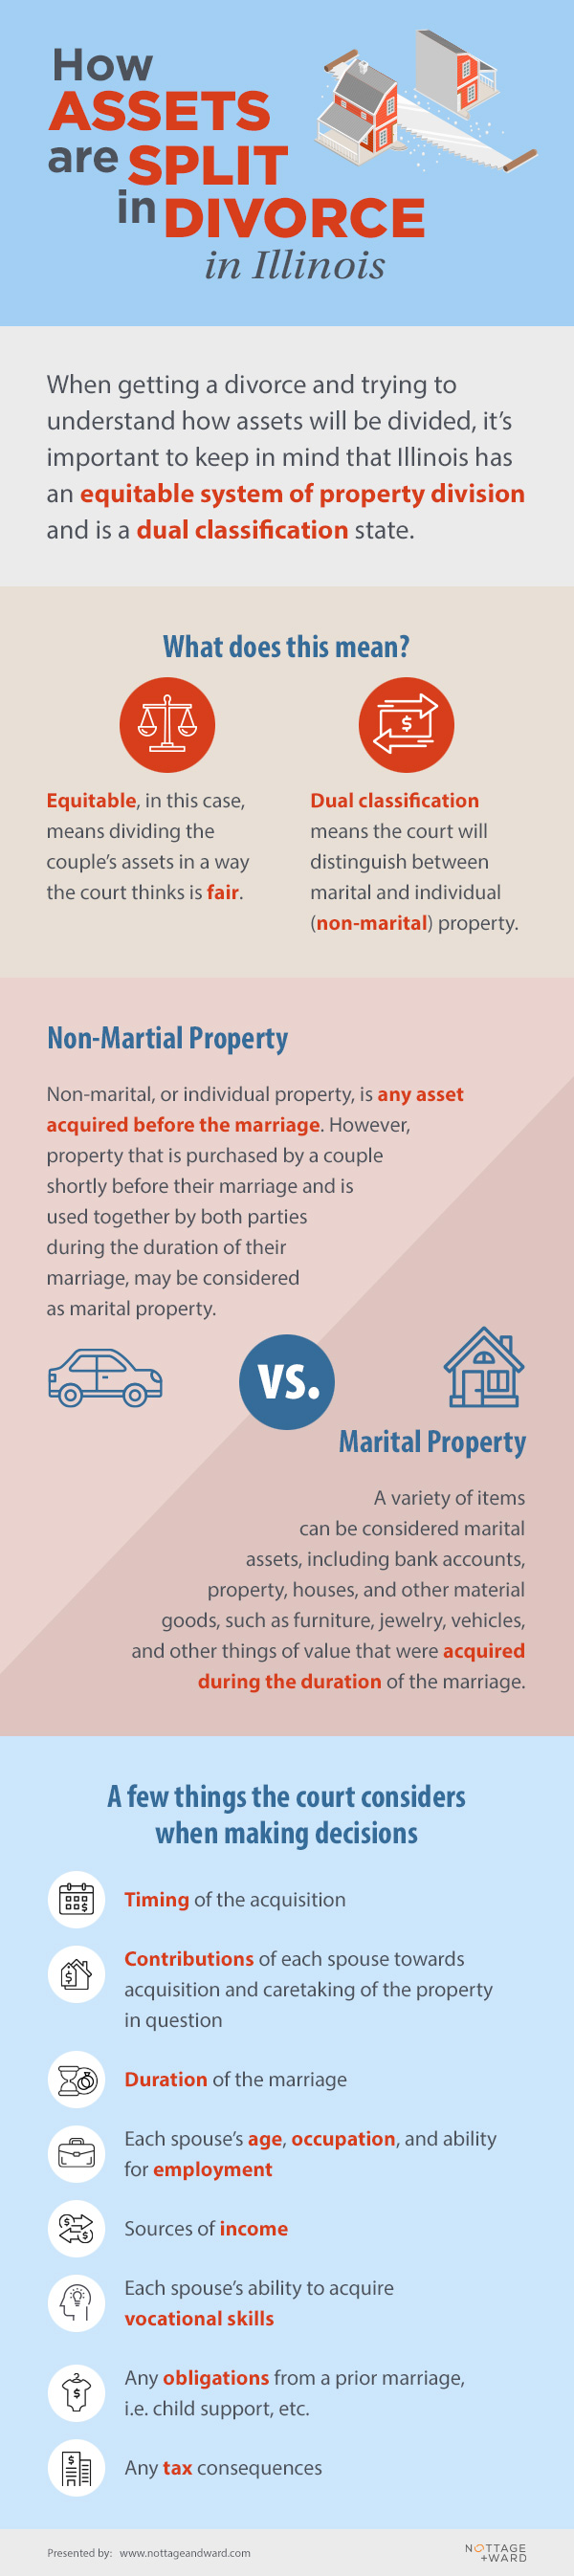 Nottage and Ward, LLP Presents: Splitting Assets Infographic